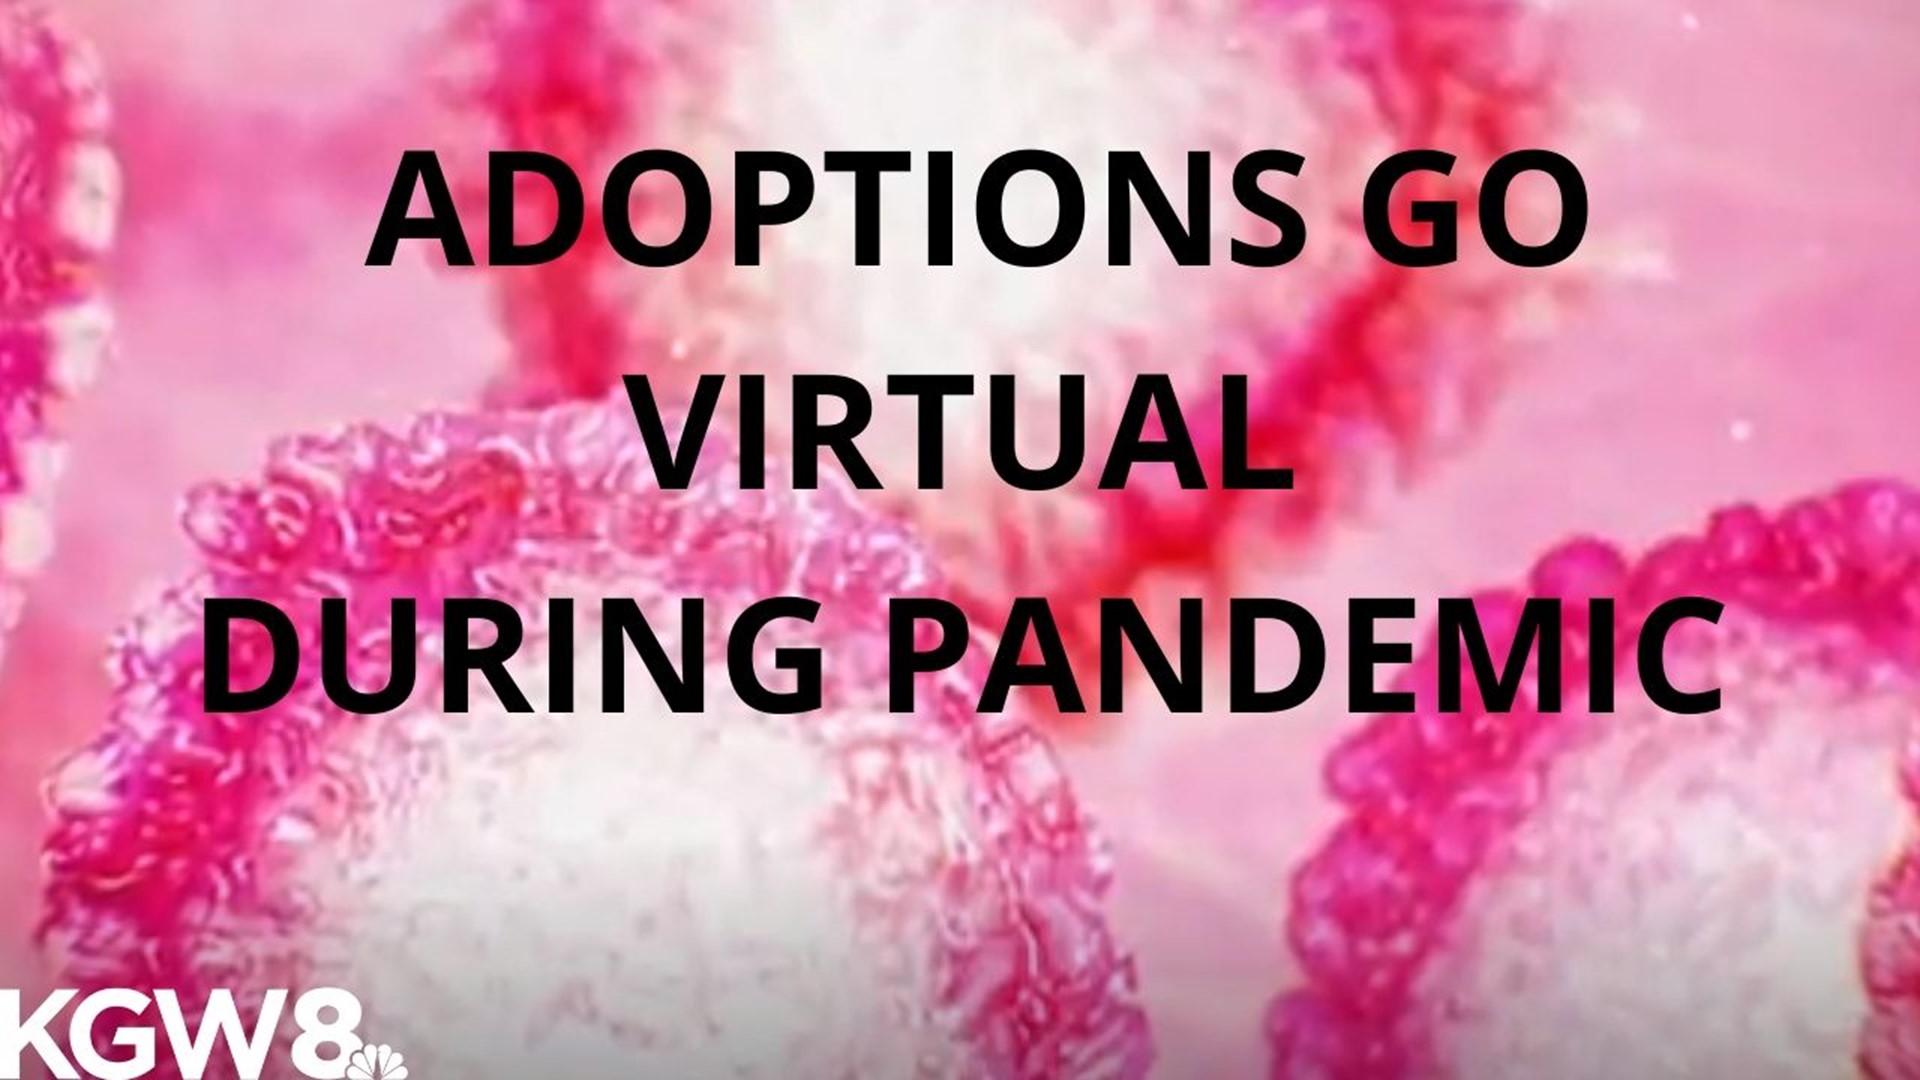 Virtual adoptions. How the process is going online during the coronavirus pandemic.